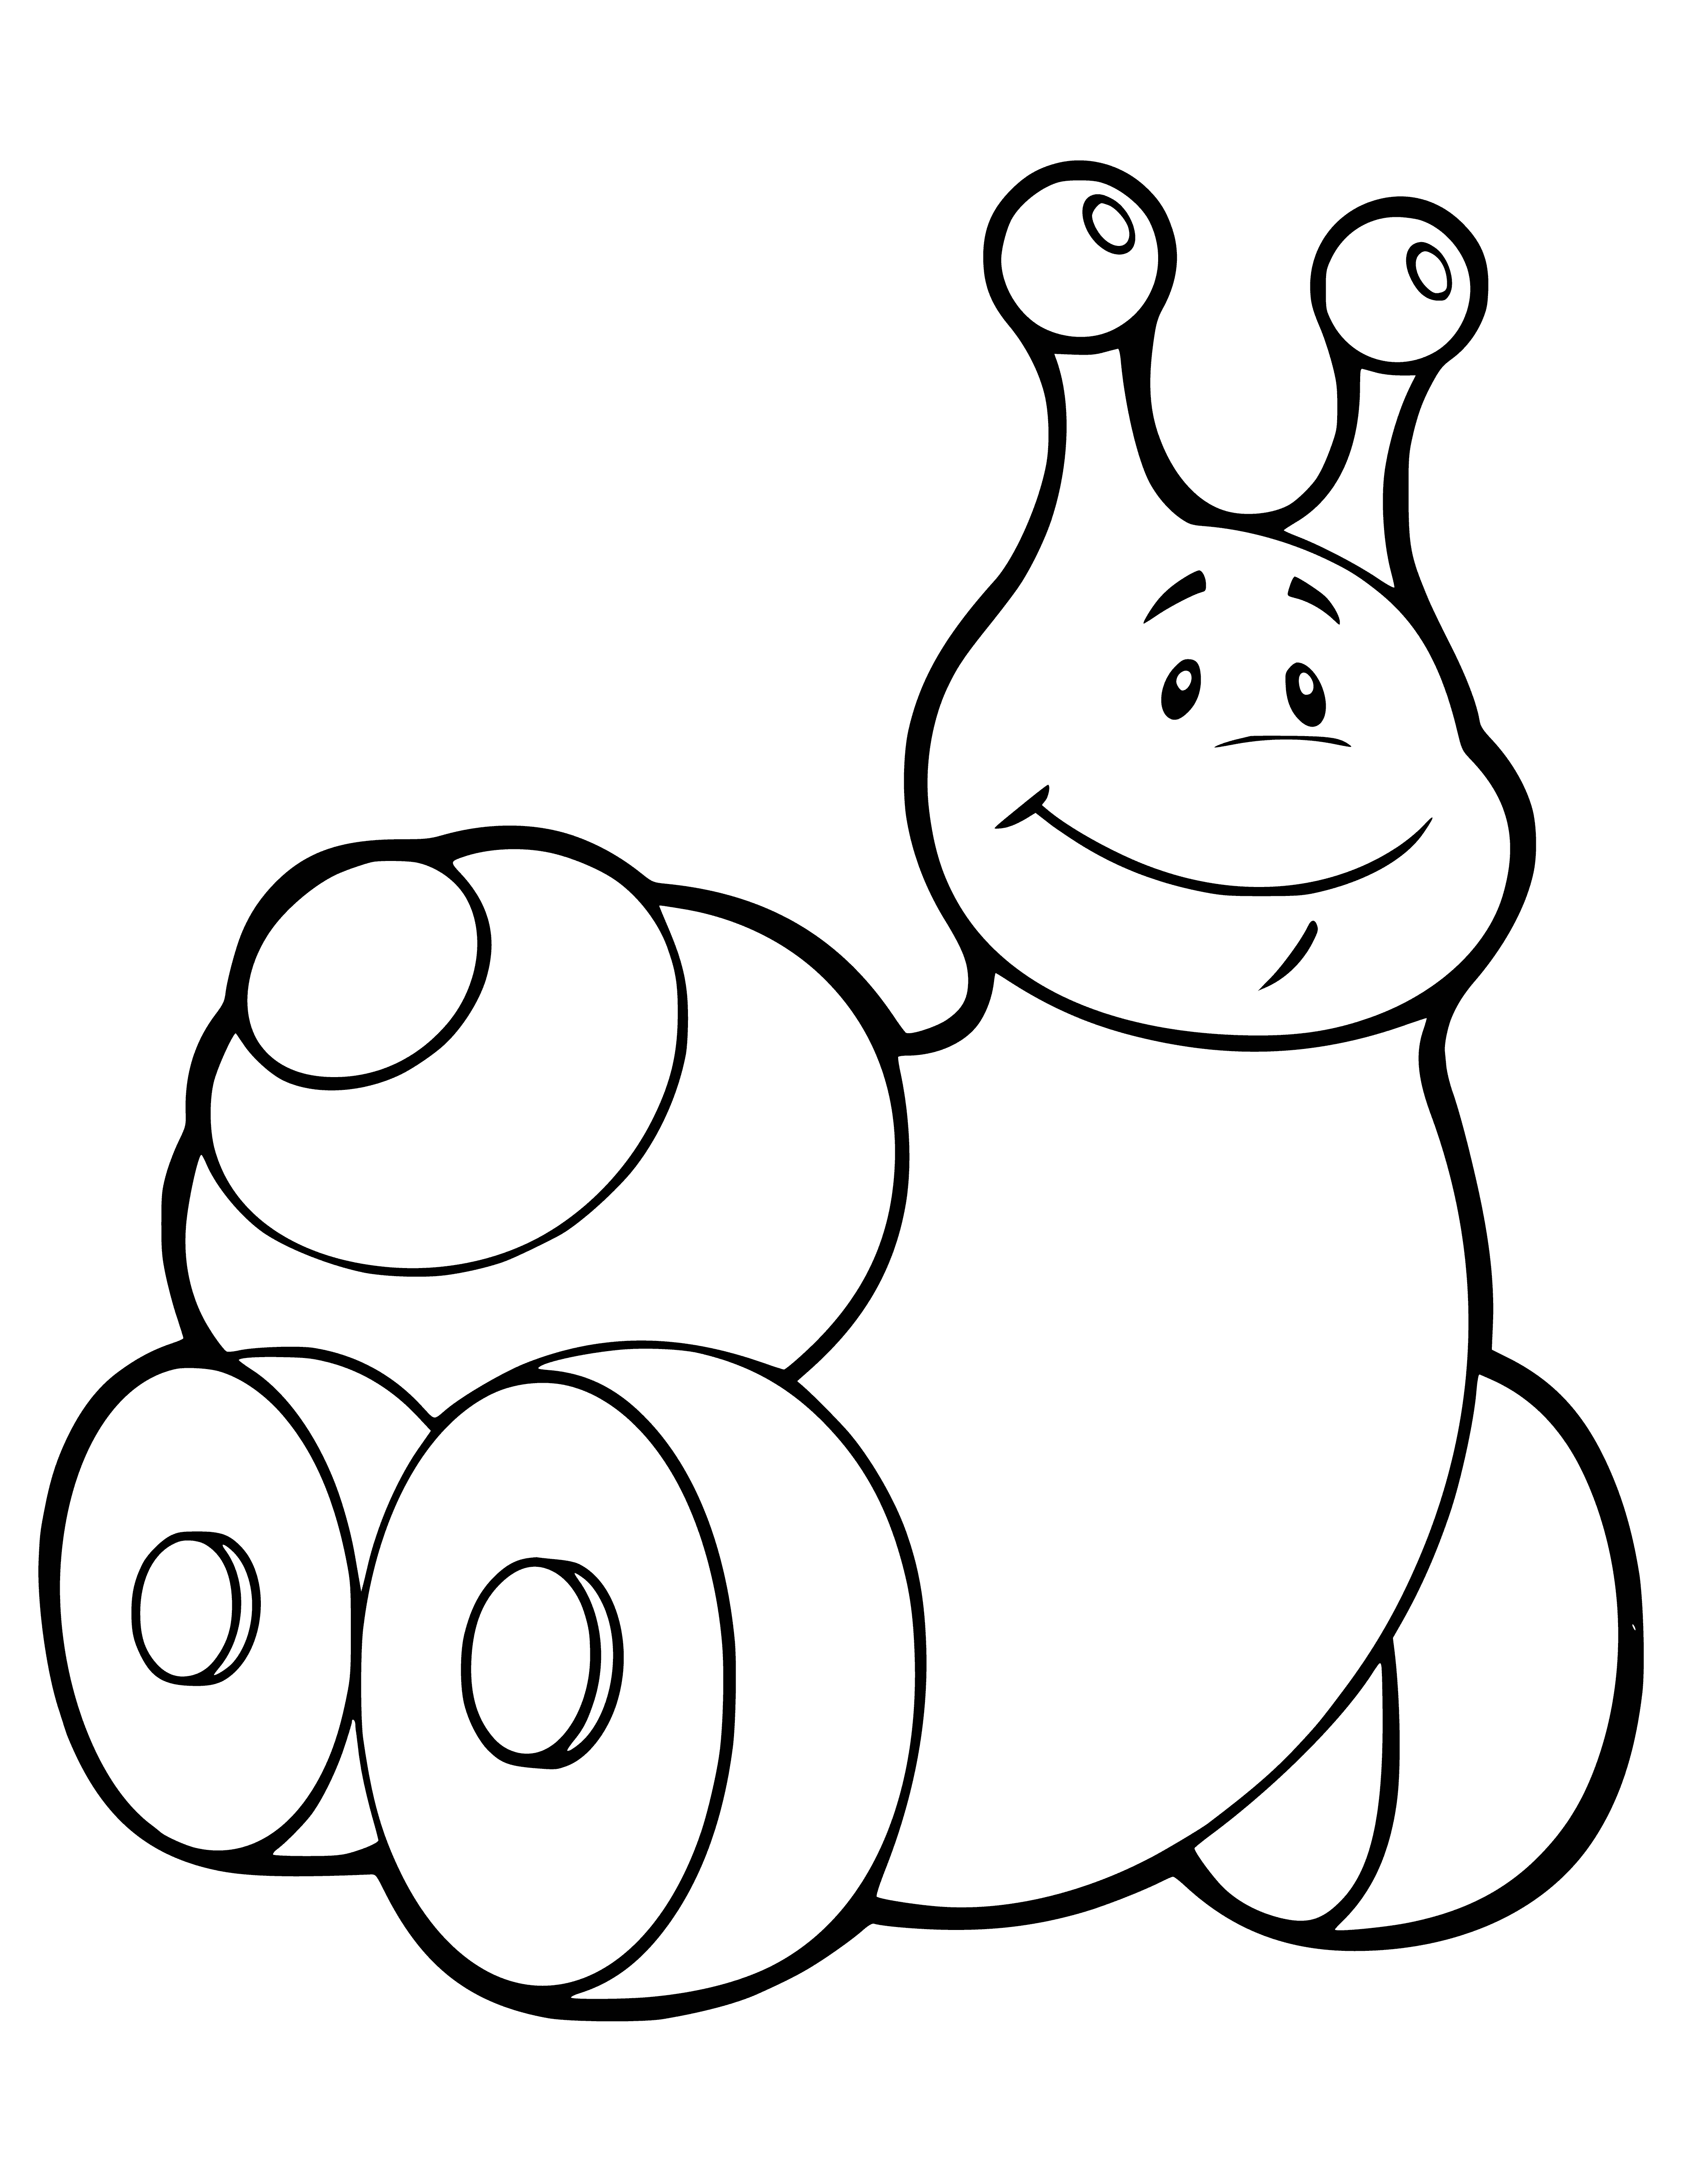 Snail toy coloring page